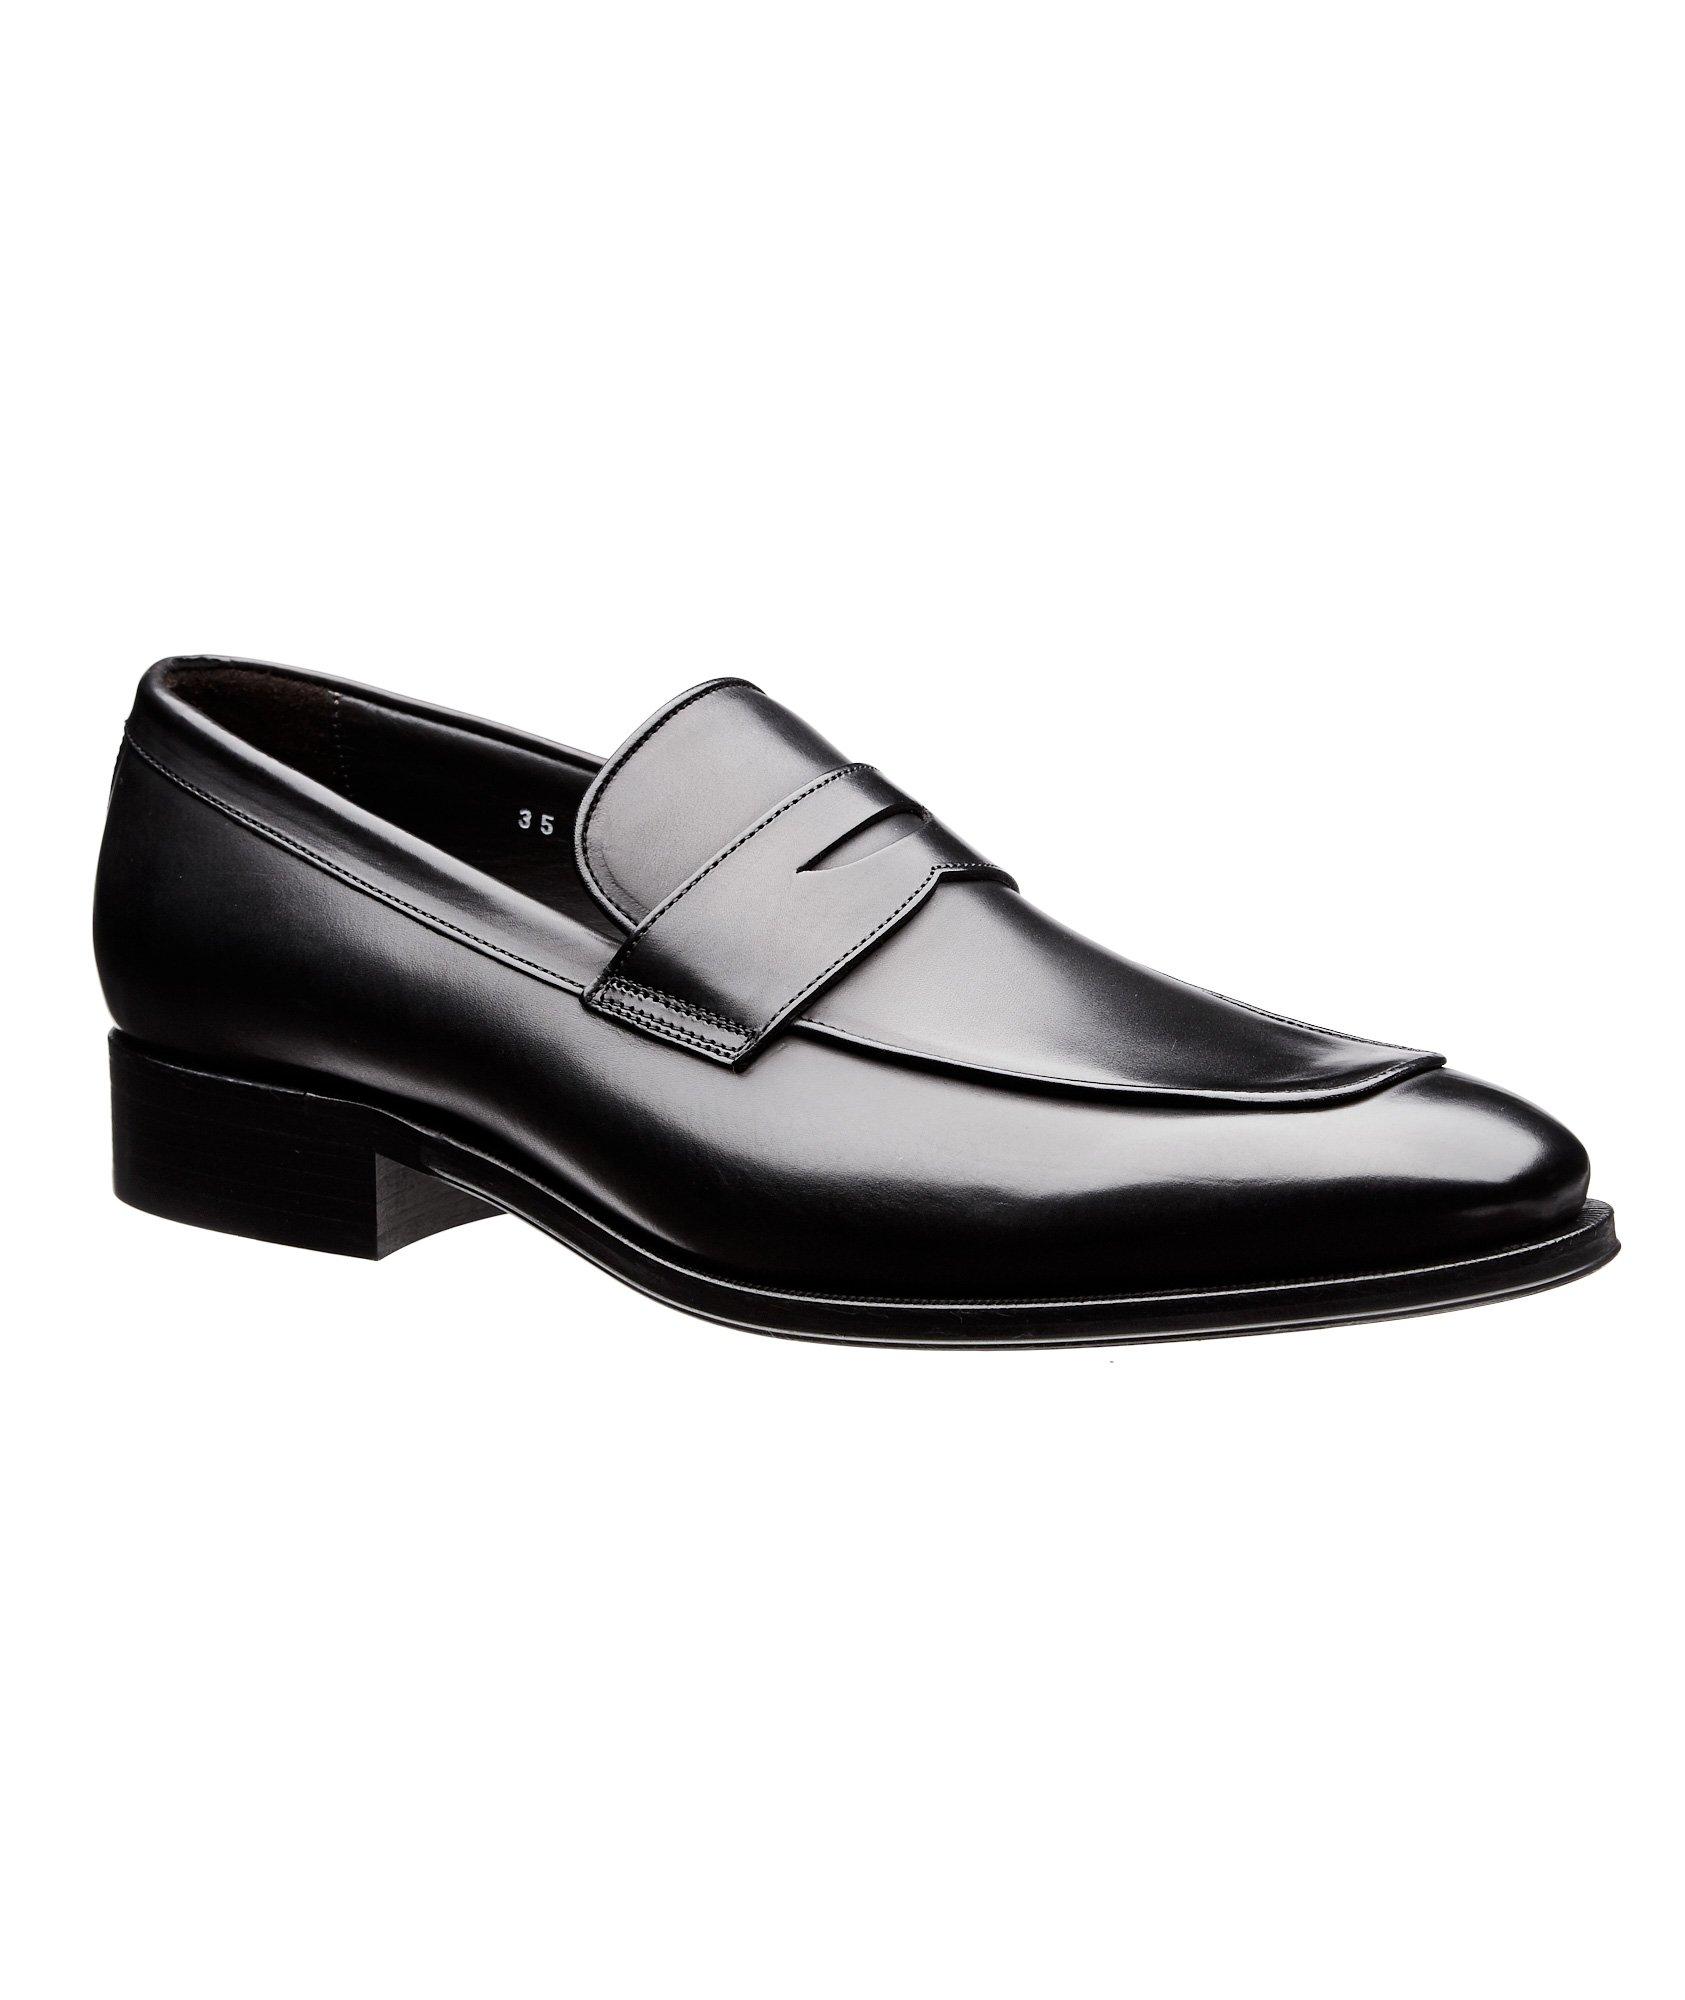 Calfskin Penny Loafers image 0